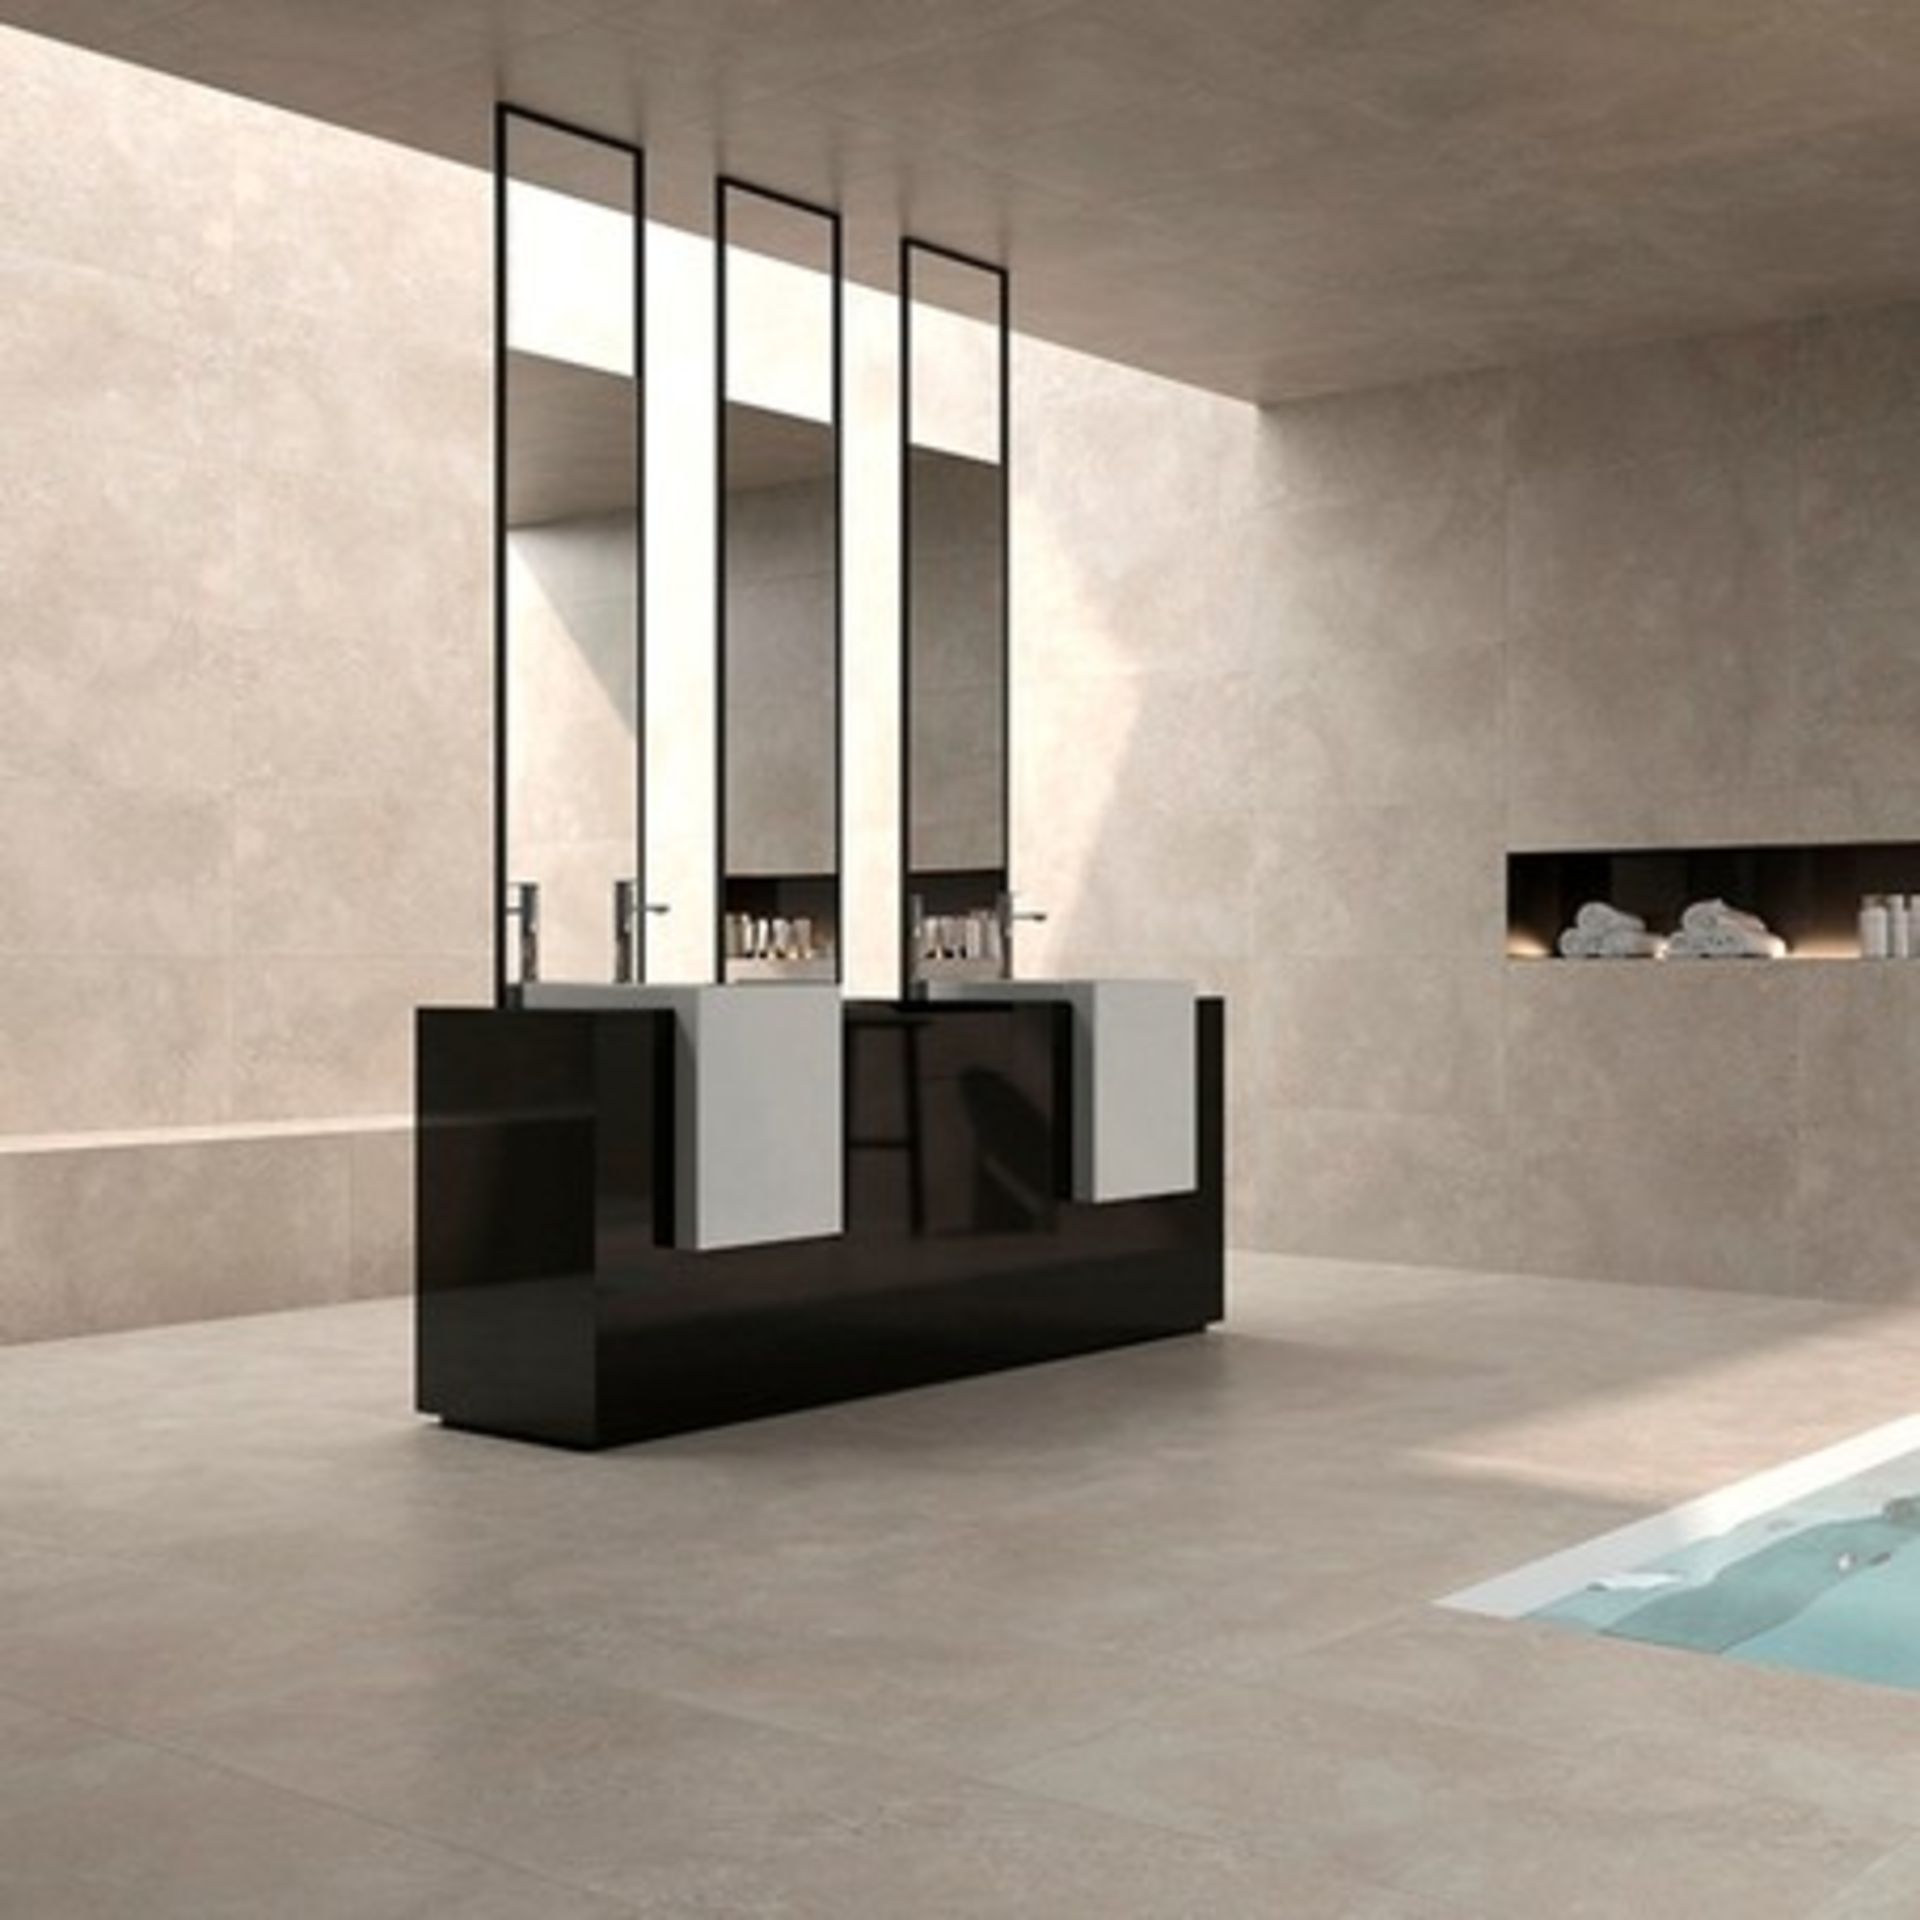 NEW 9m2 Michigan Noce Matte Wall and Floor Tiles. 440x440mm per tile, 8mm thick. These trend No...